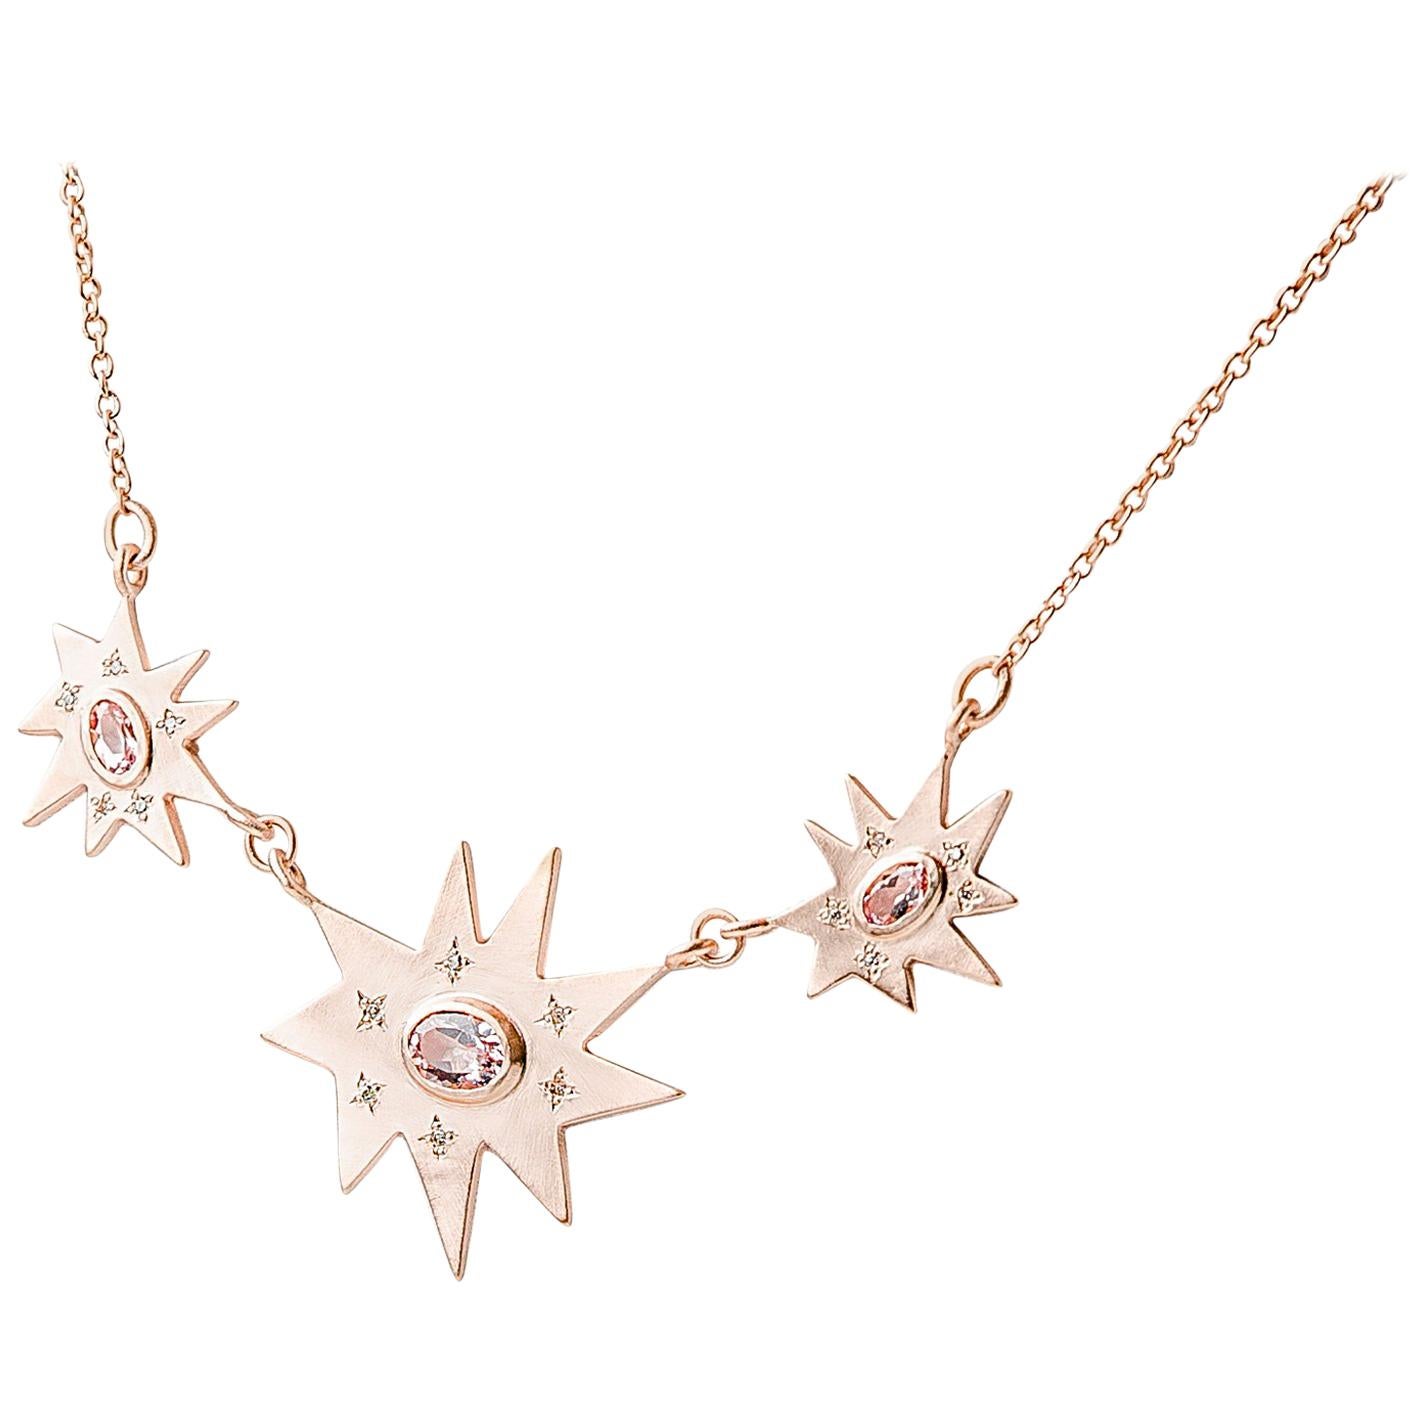 Emily Kuvin Rose Gold, Diamond and Morganite Triple Organic Star Necklace